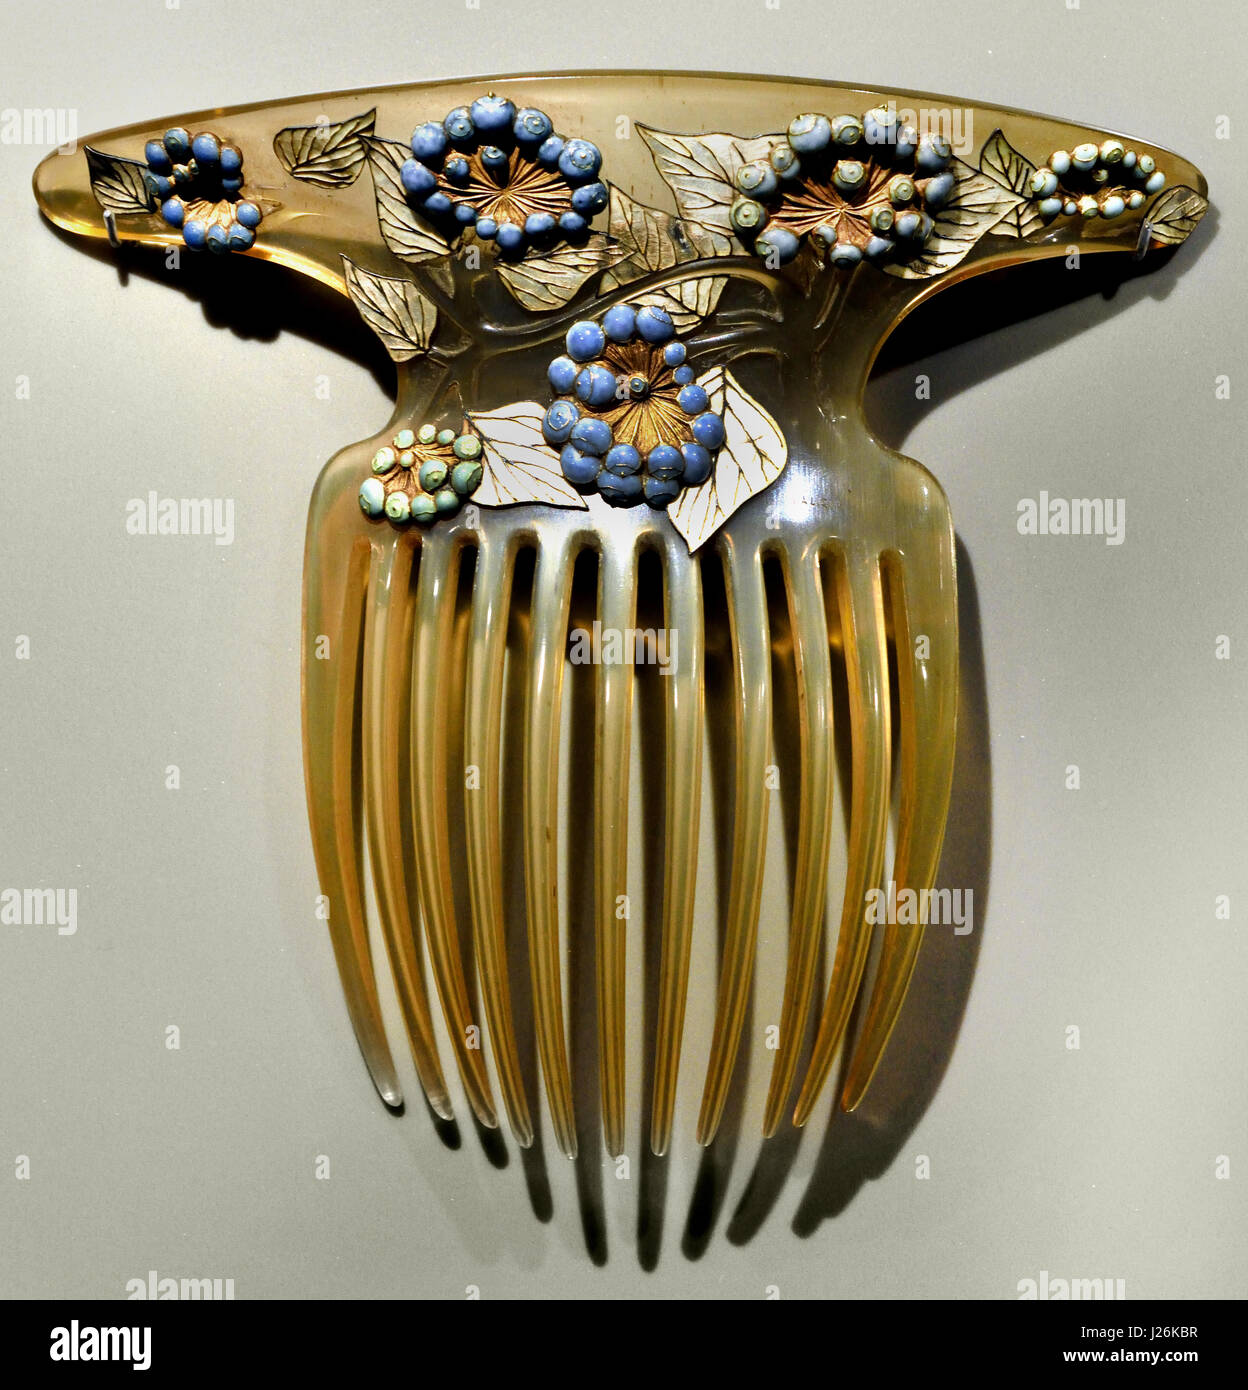 Haircomb - Hair comb - IVY 1898-1900 René Jules Lalique Paris French glass designer known for his creations of glass art, perfume bottles, vases, jewellery, France . Stock Photo